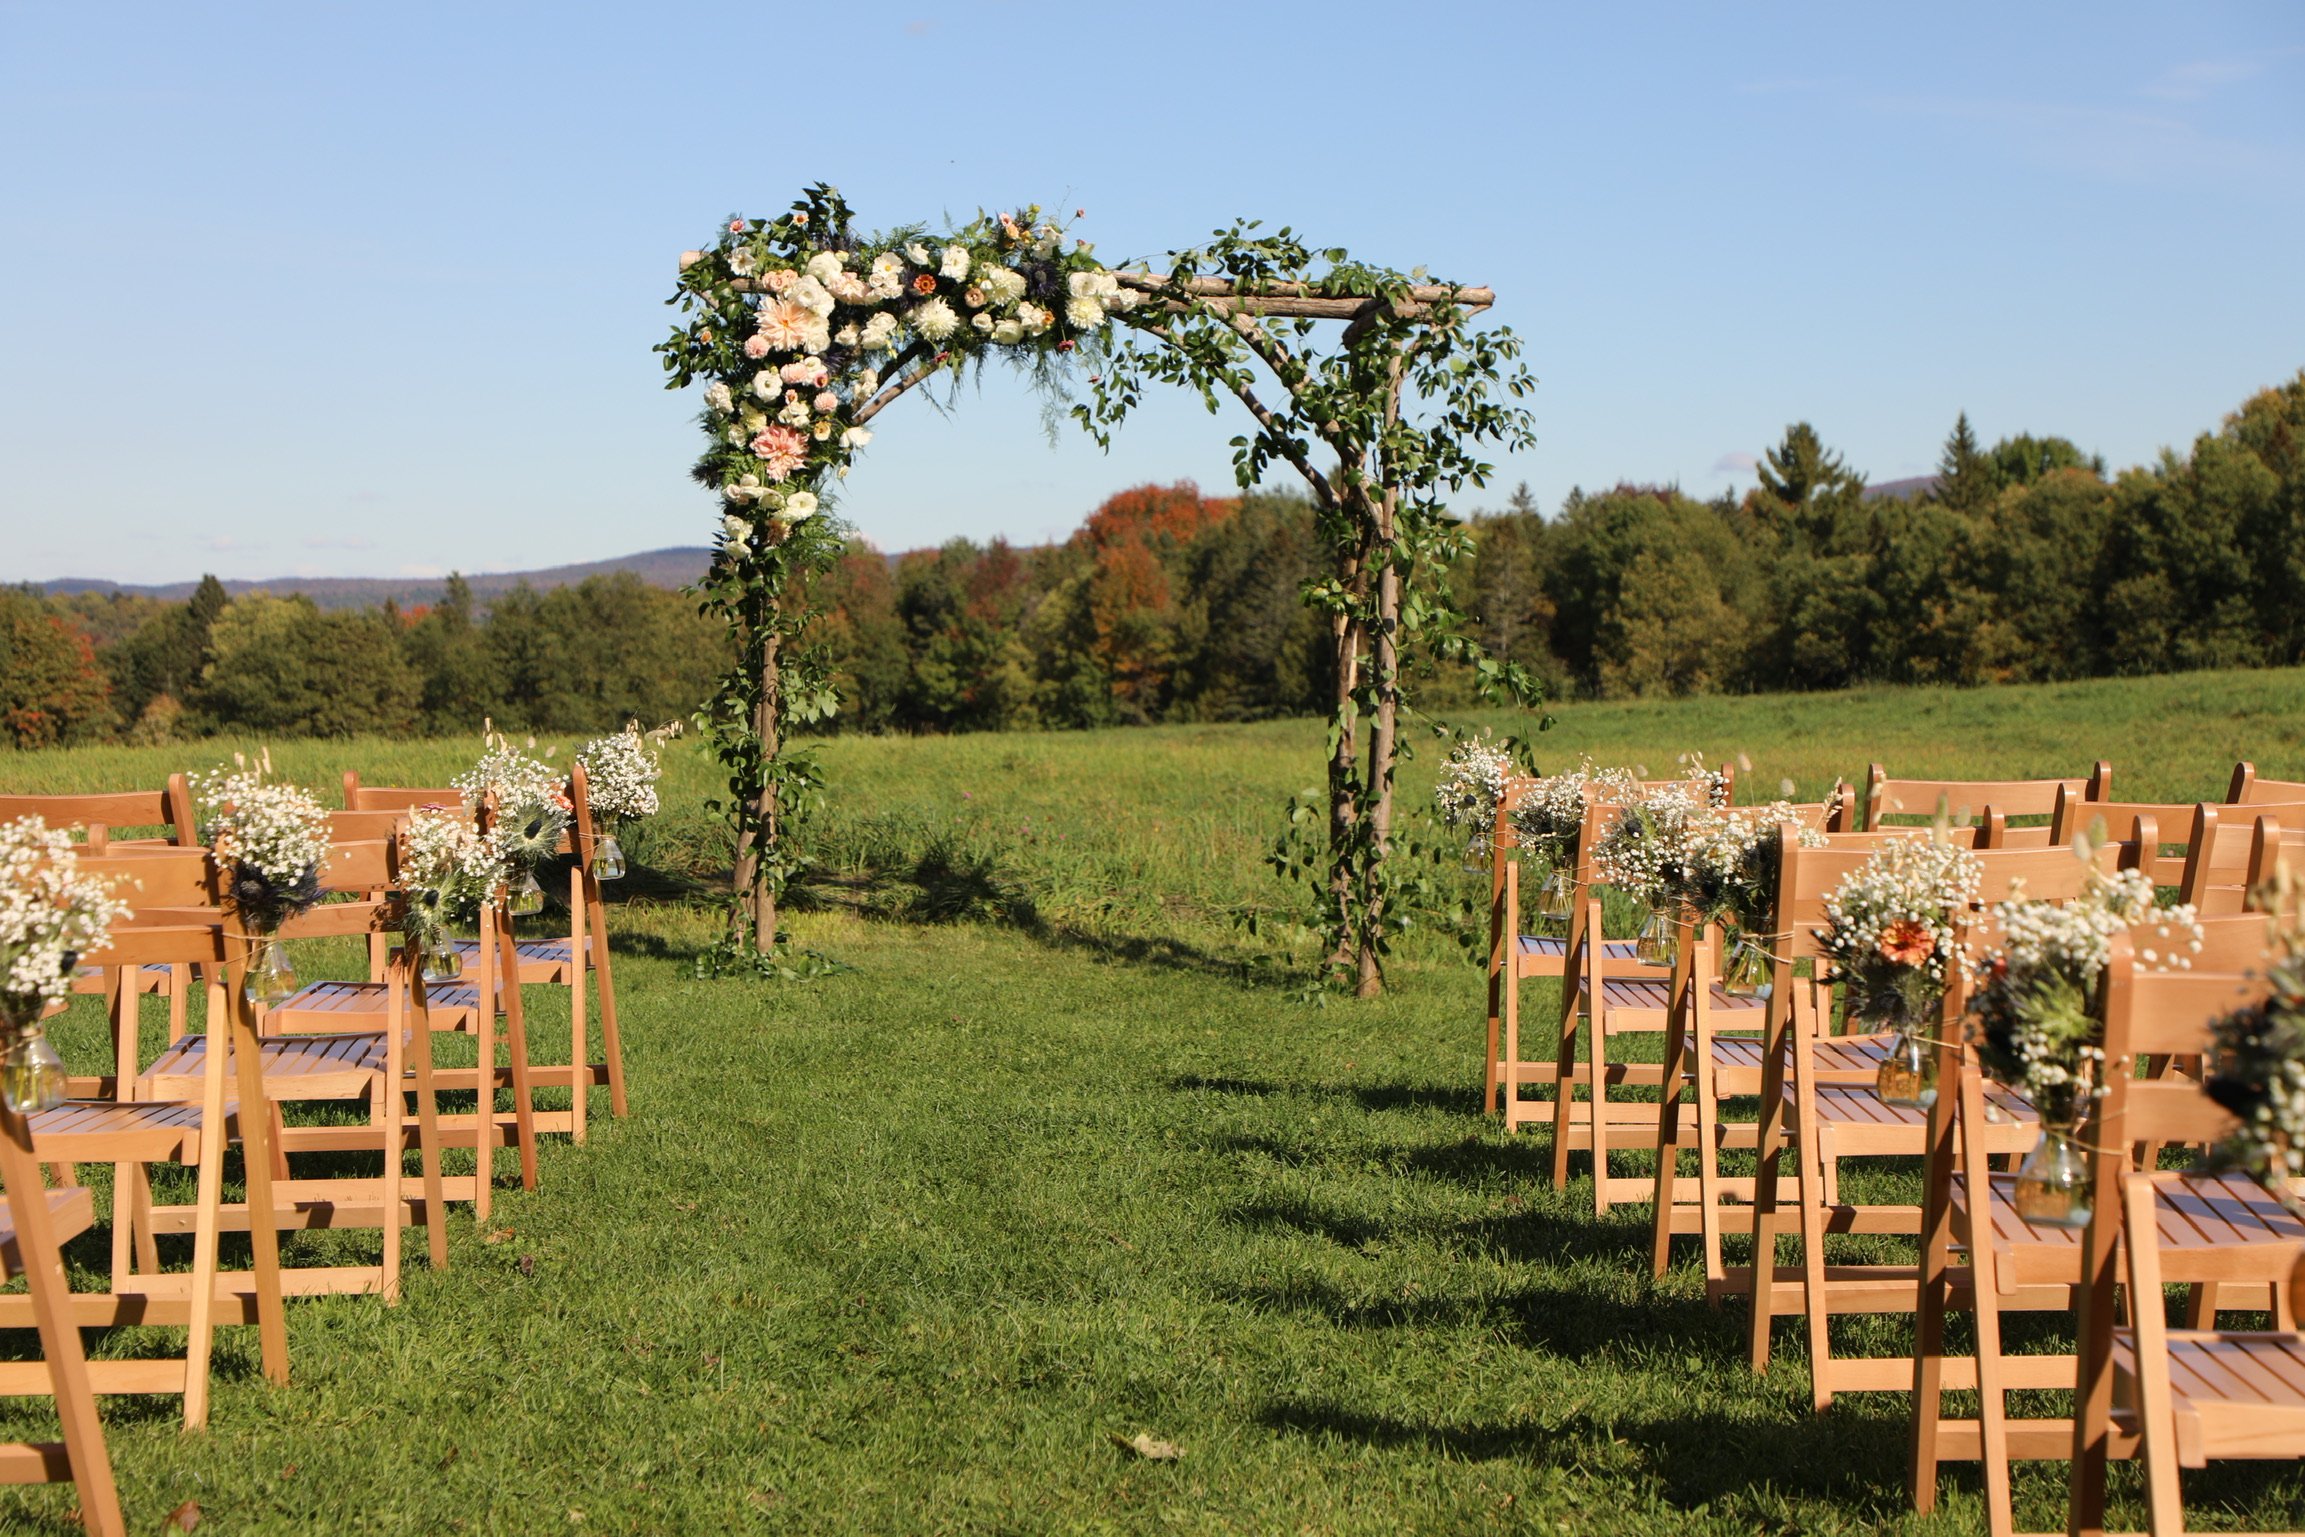 Flowered covered alter and chairs set up for a wedding